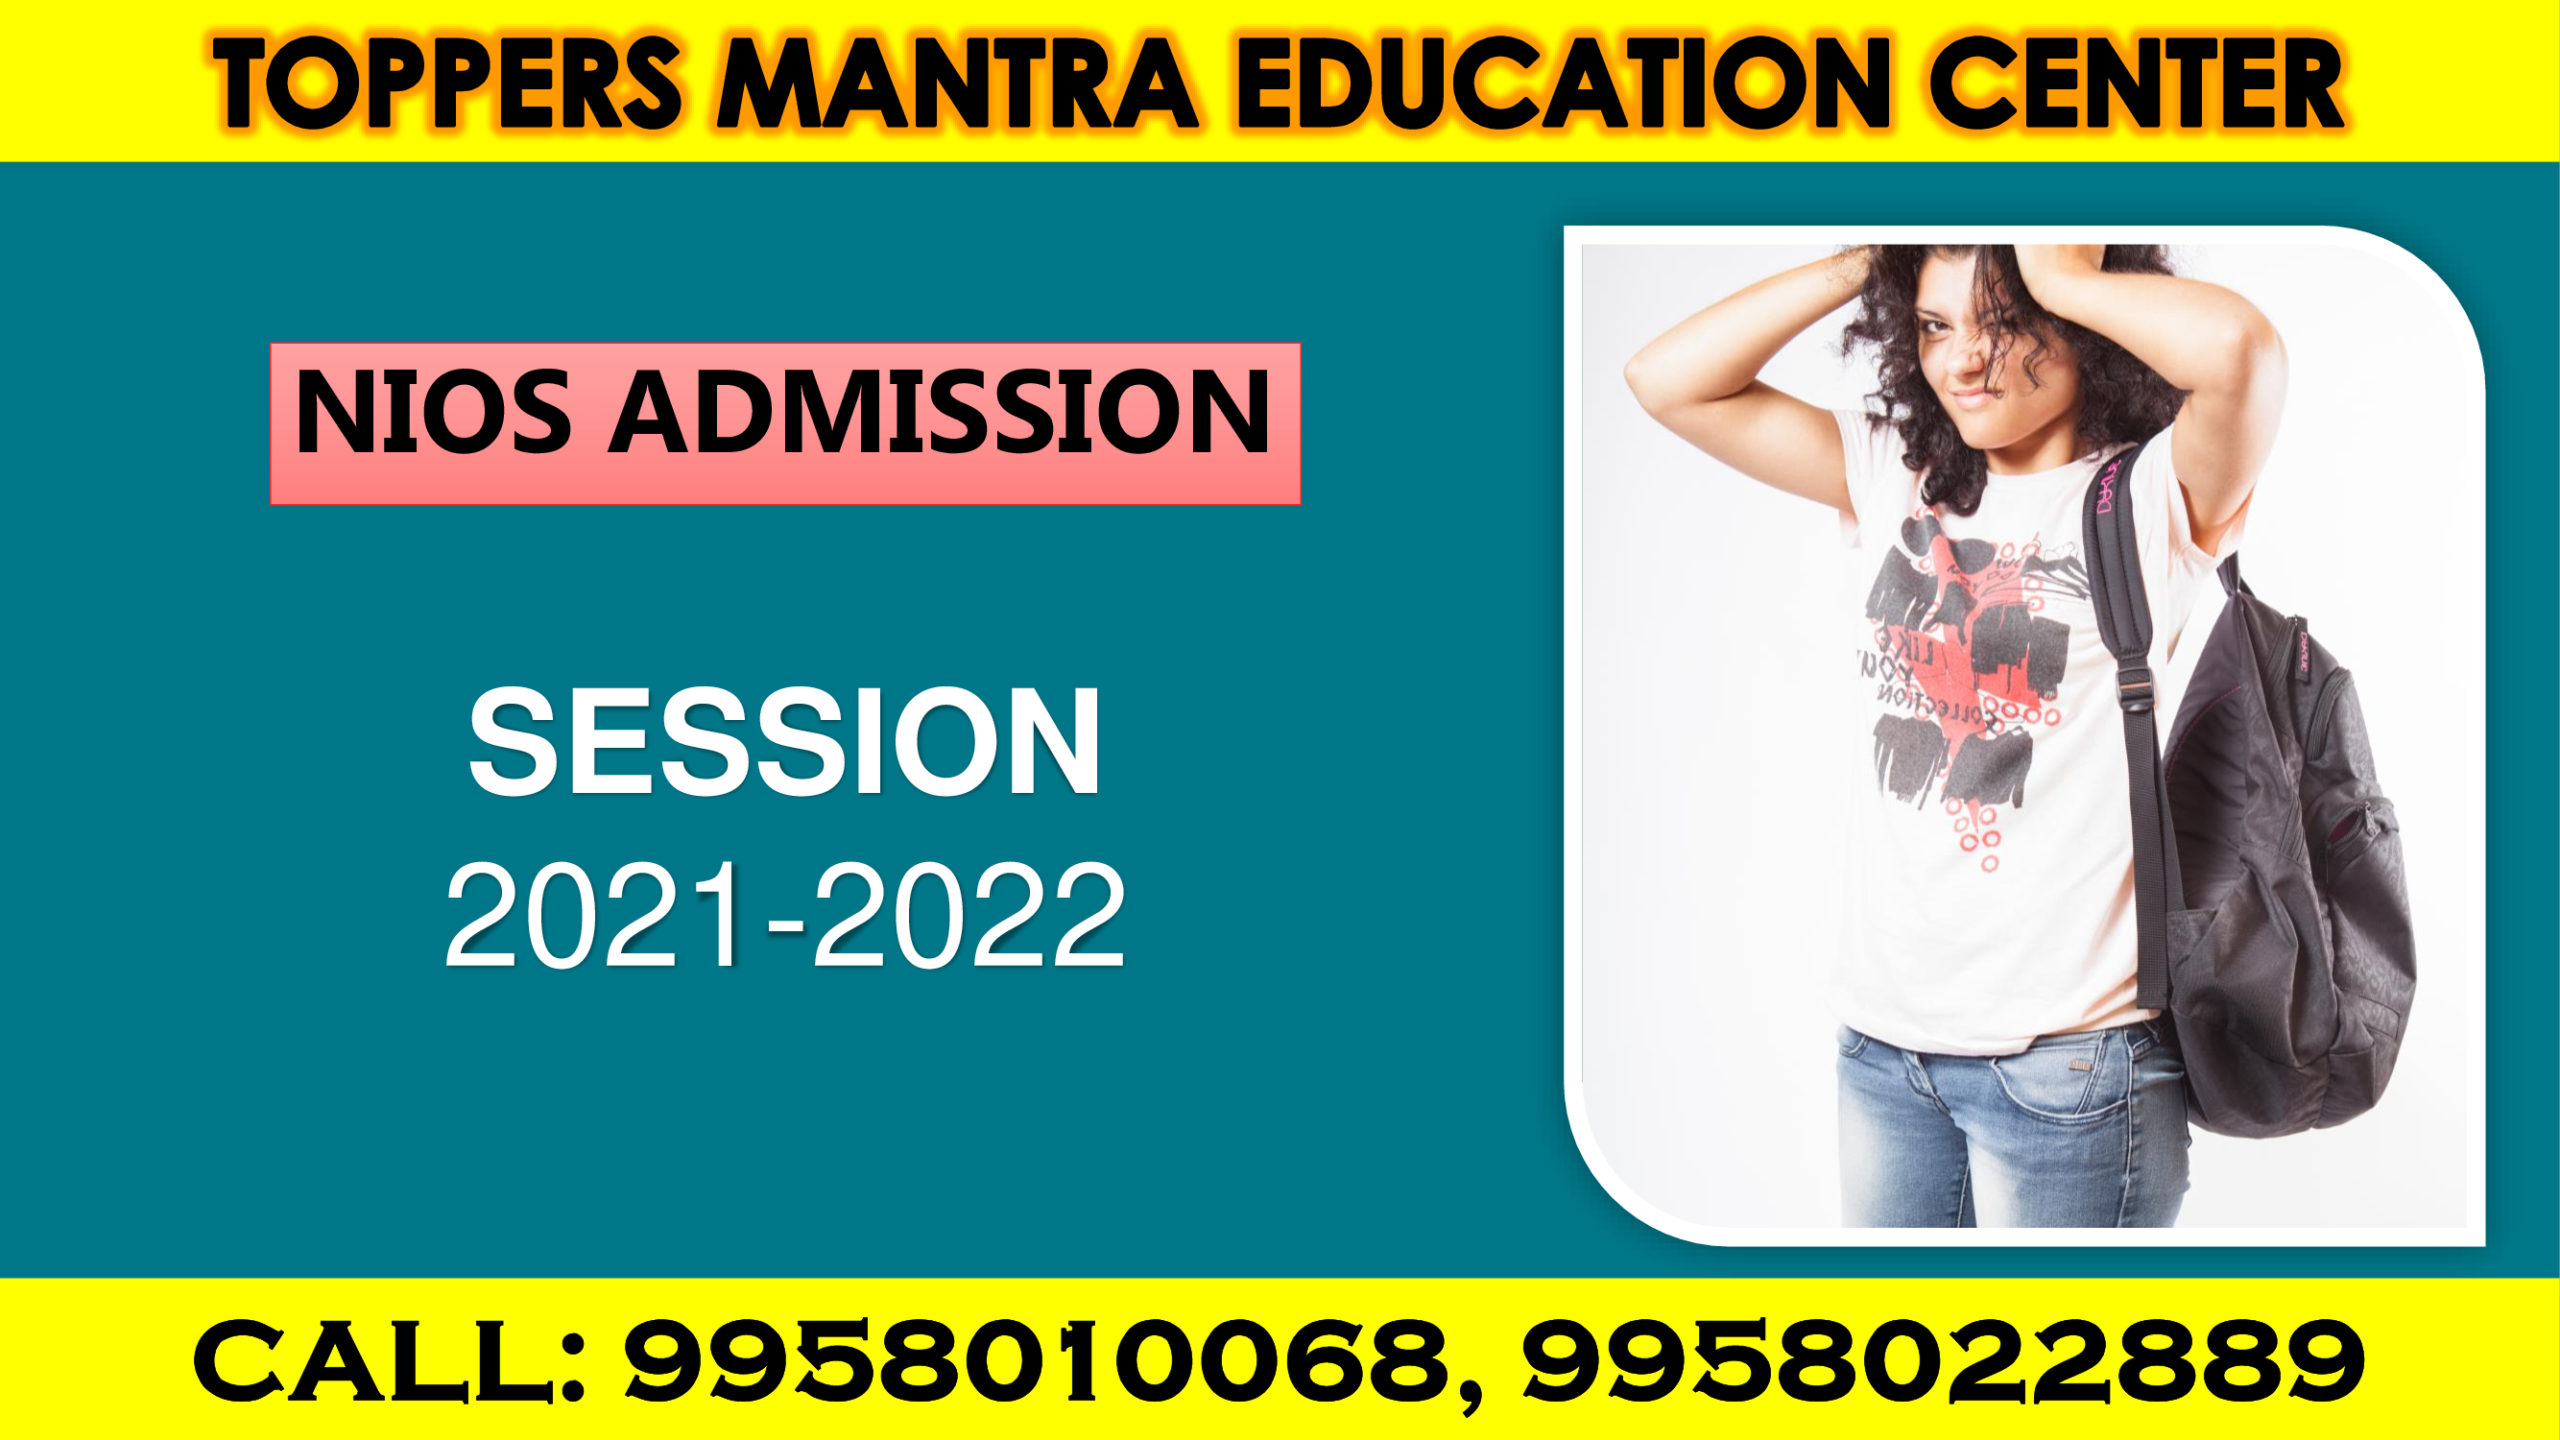 NIOS ADMISSION 2021 2022 TOPPERS MANTRA EDUCATION CENTER scaled